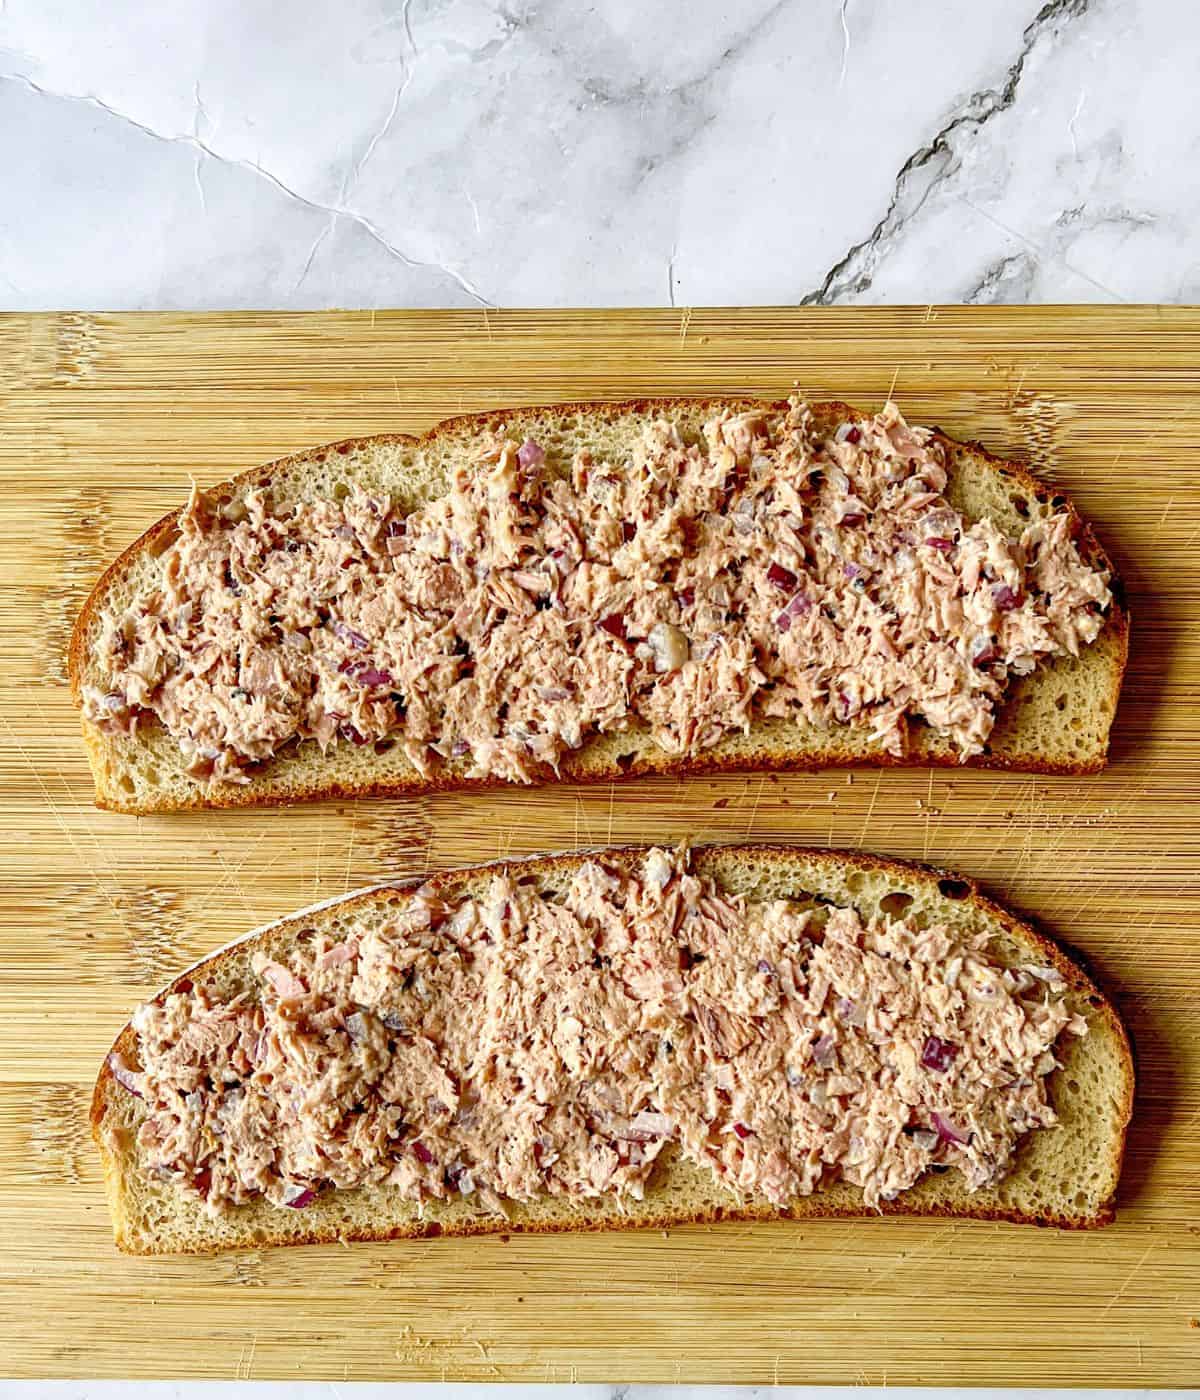 Tuna mayo spread on two slices of bread laid on a chopping board.